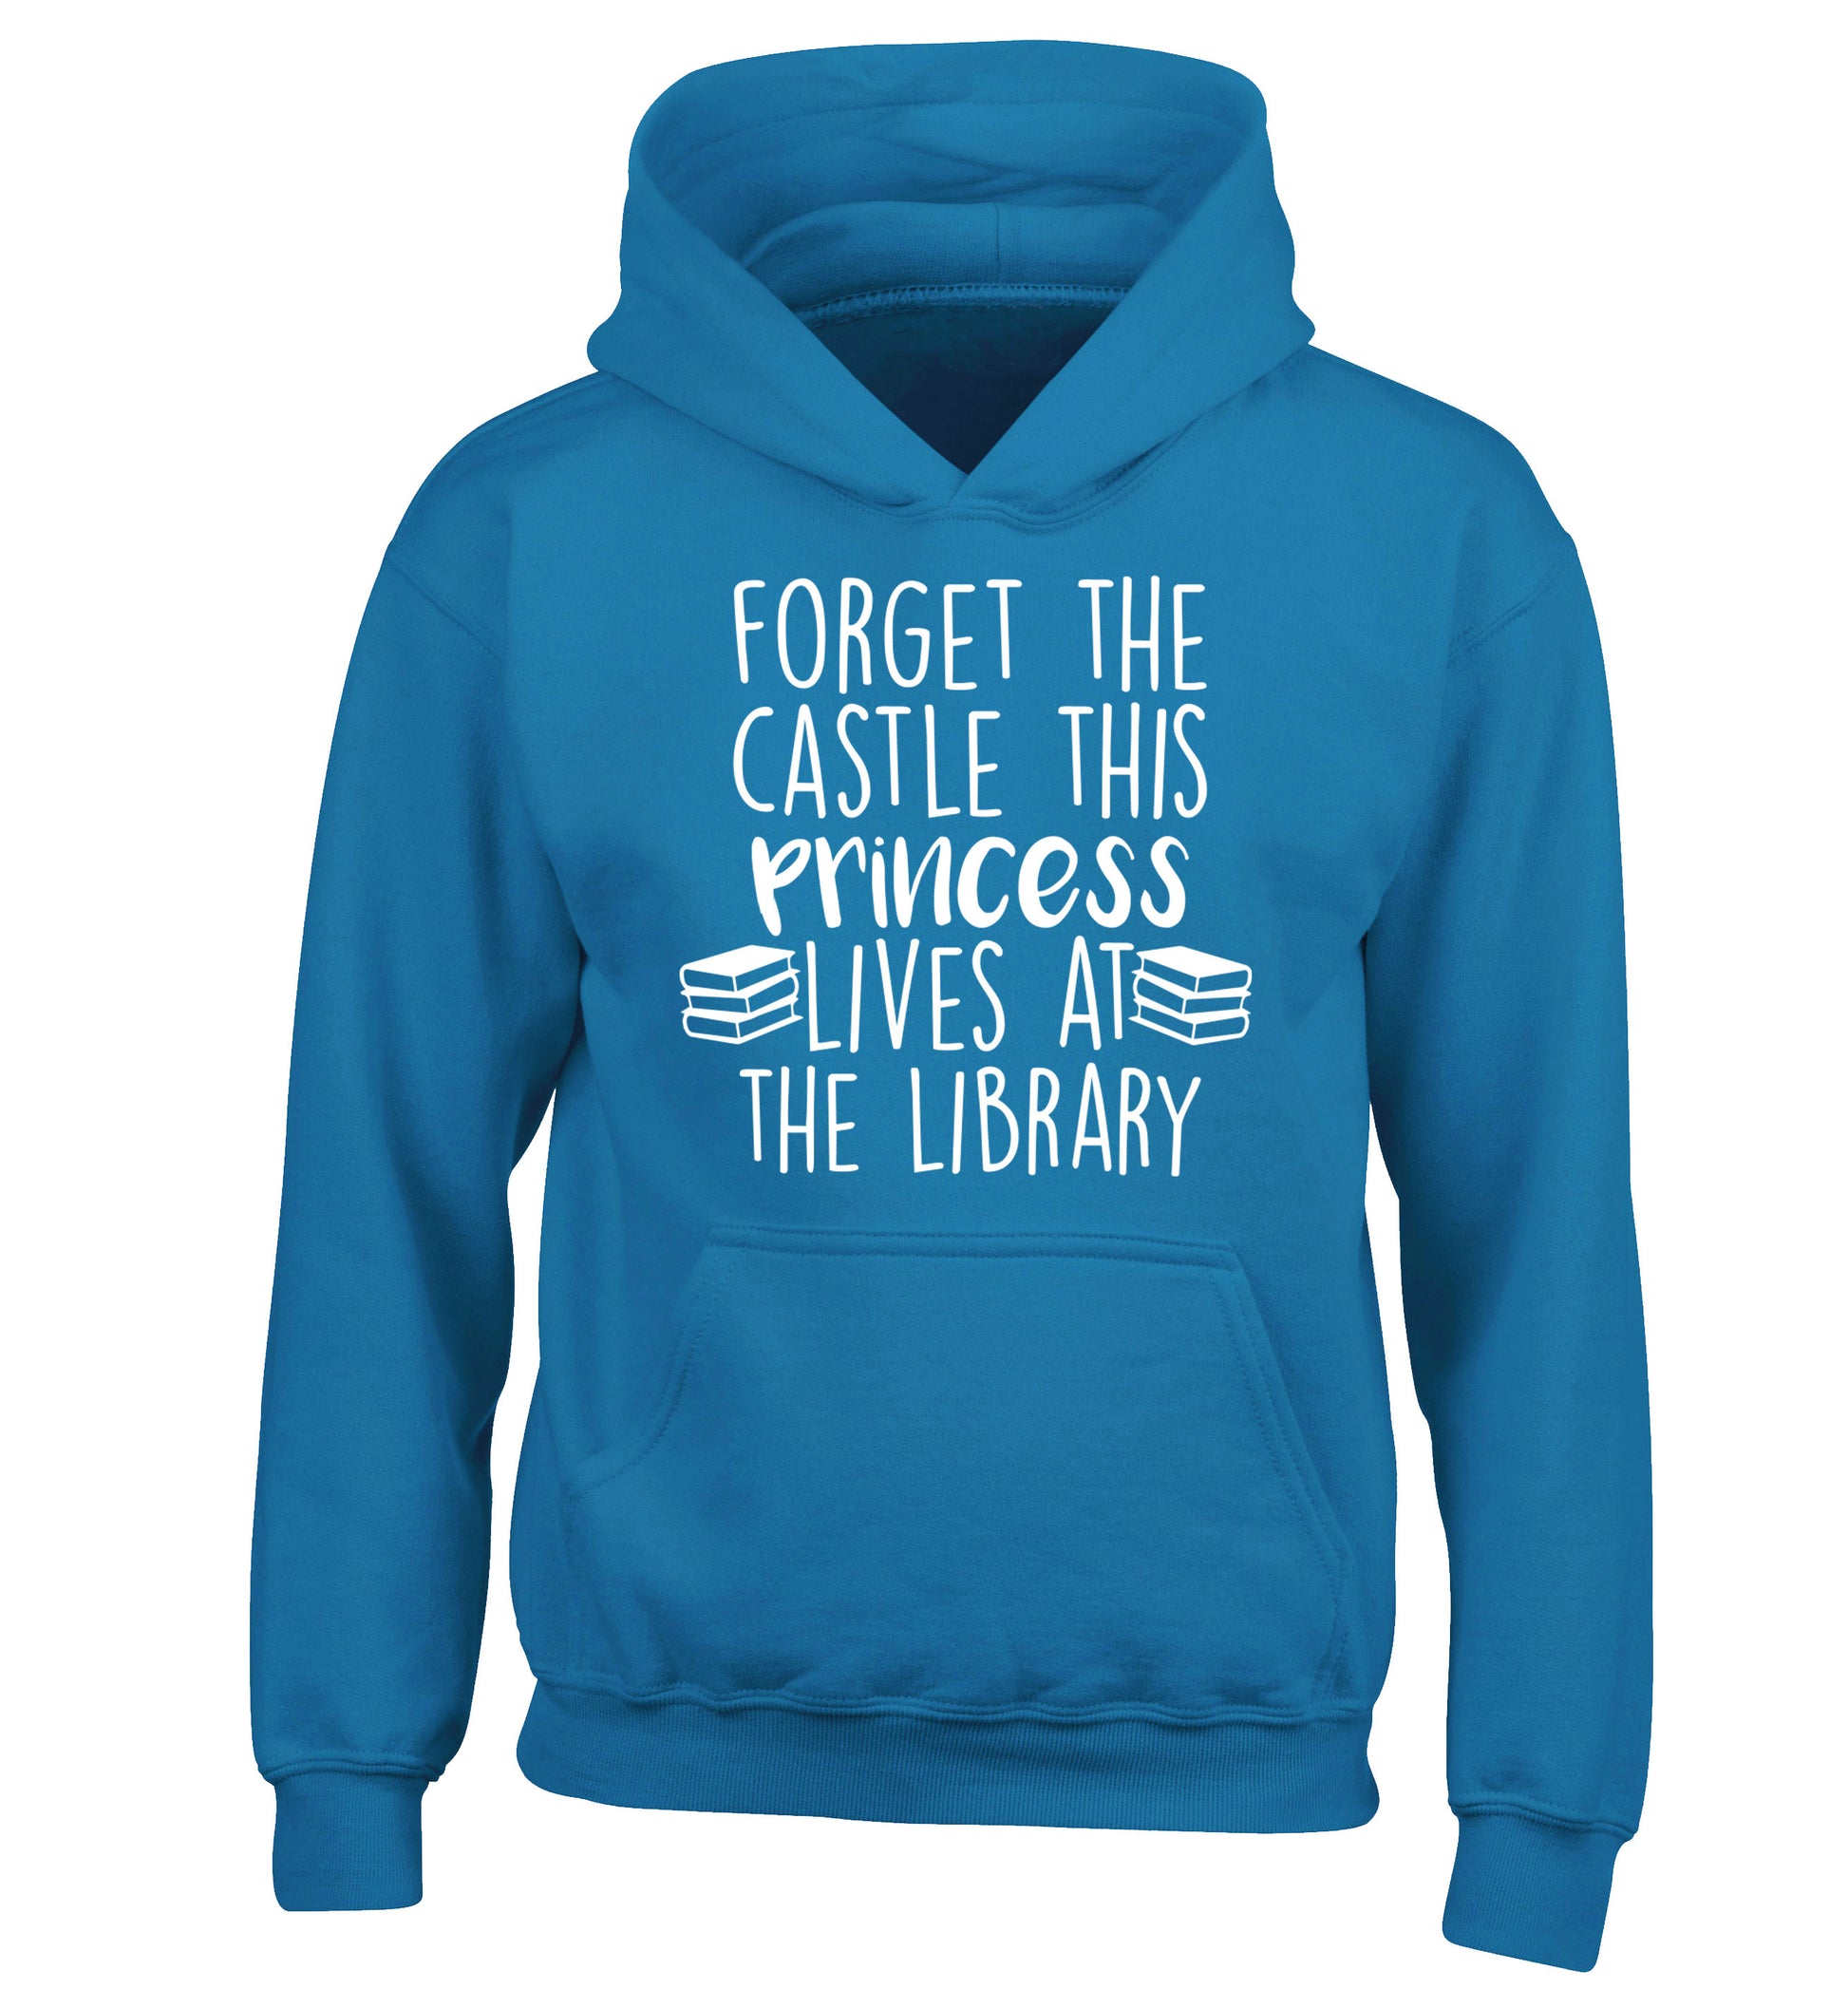 Forget the castle this princess lives at the library children's blue hoodie 12-14 Years